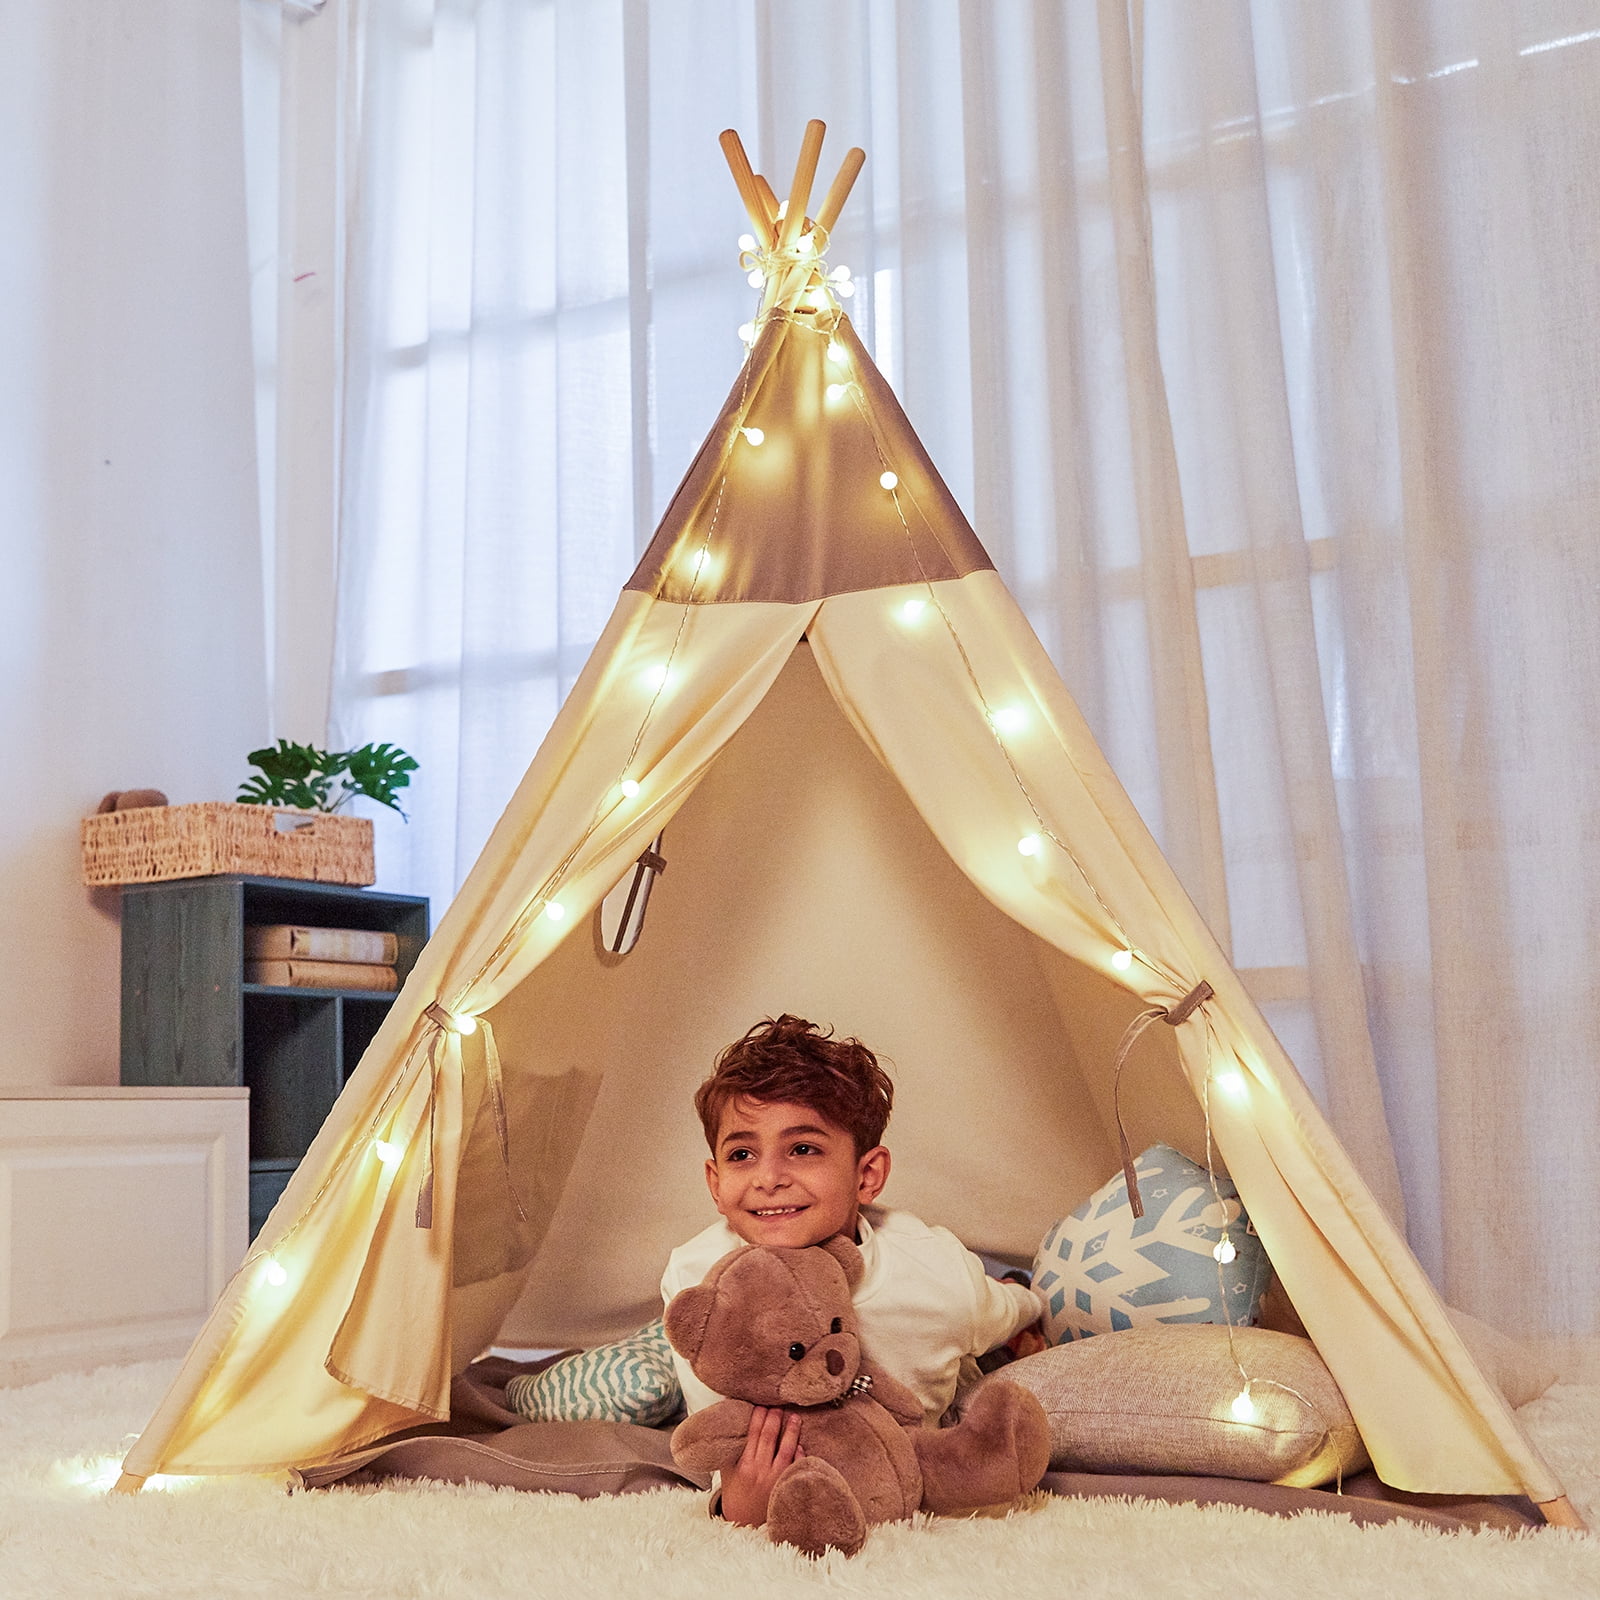 Indian White Lace Play Tent Teepee Kids Children Indoor Playhouse Sleeping Dome 